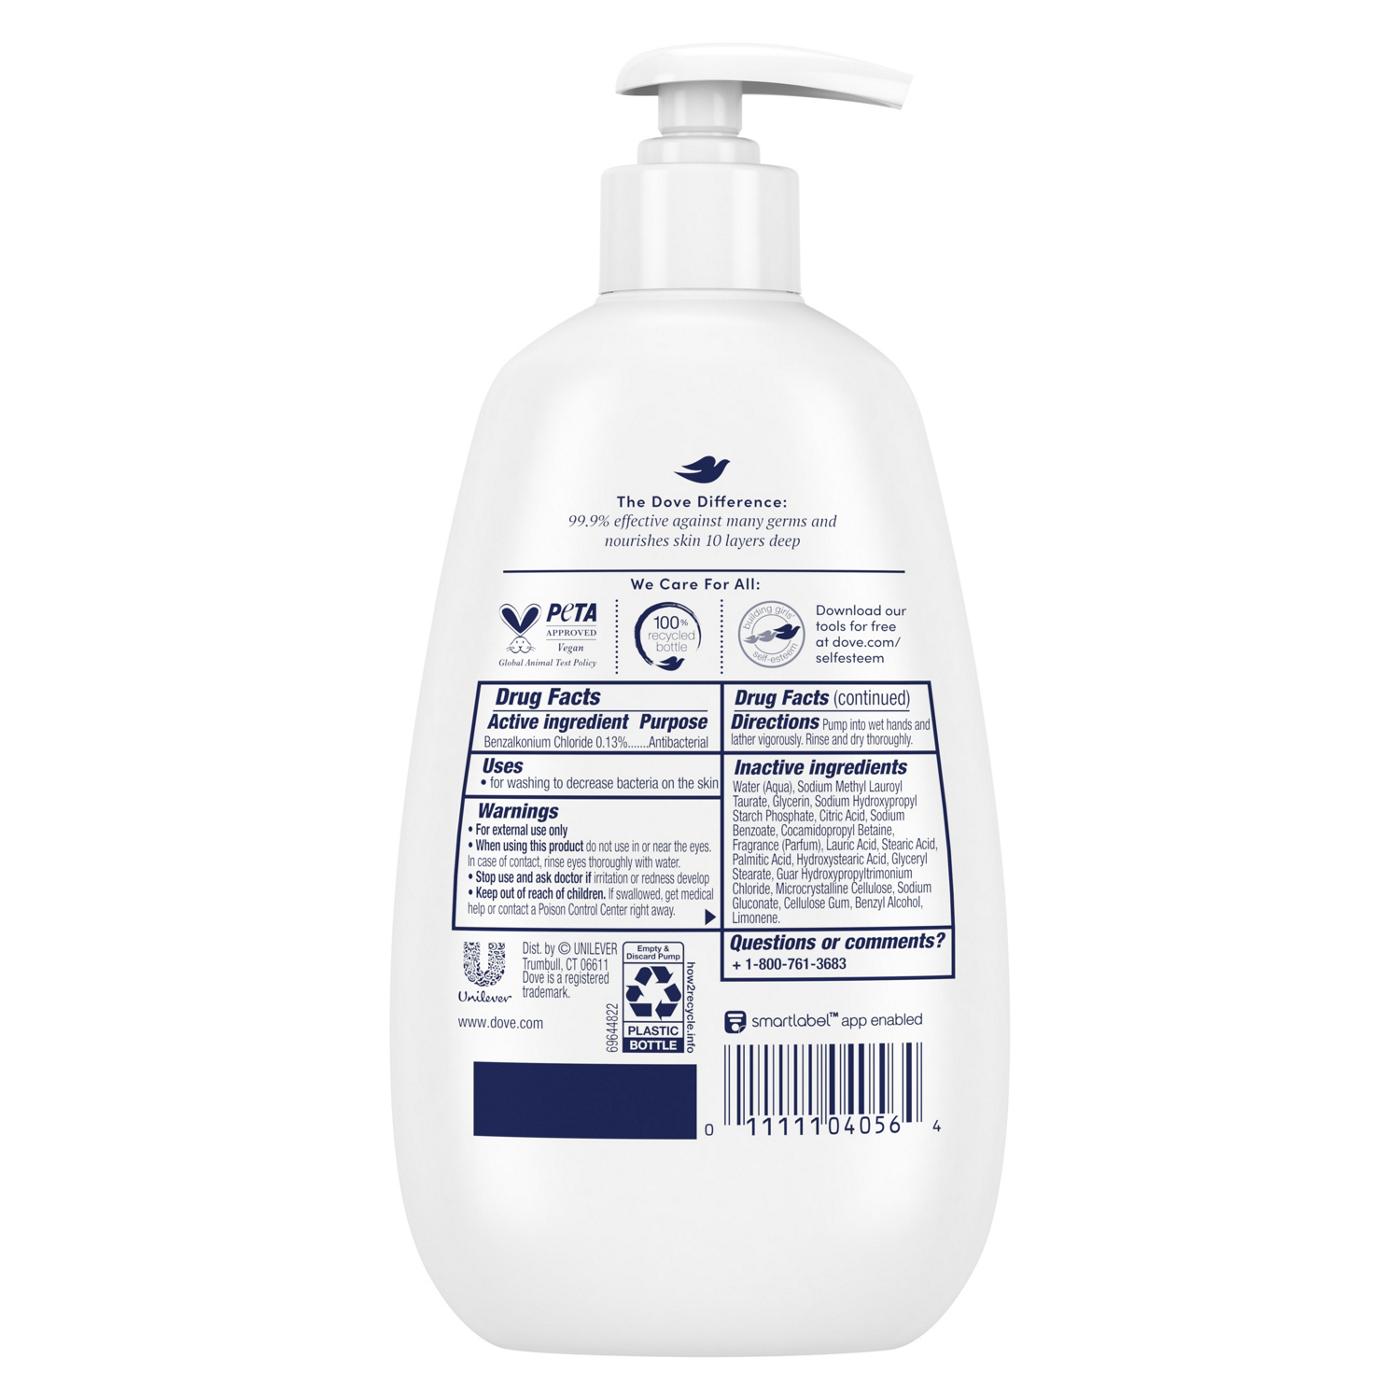 Dove Care & Protect Antibacterial Hand Wash; image 6 of 9